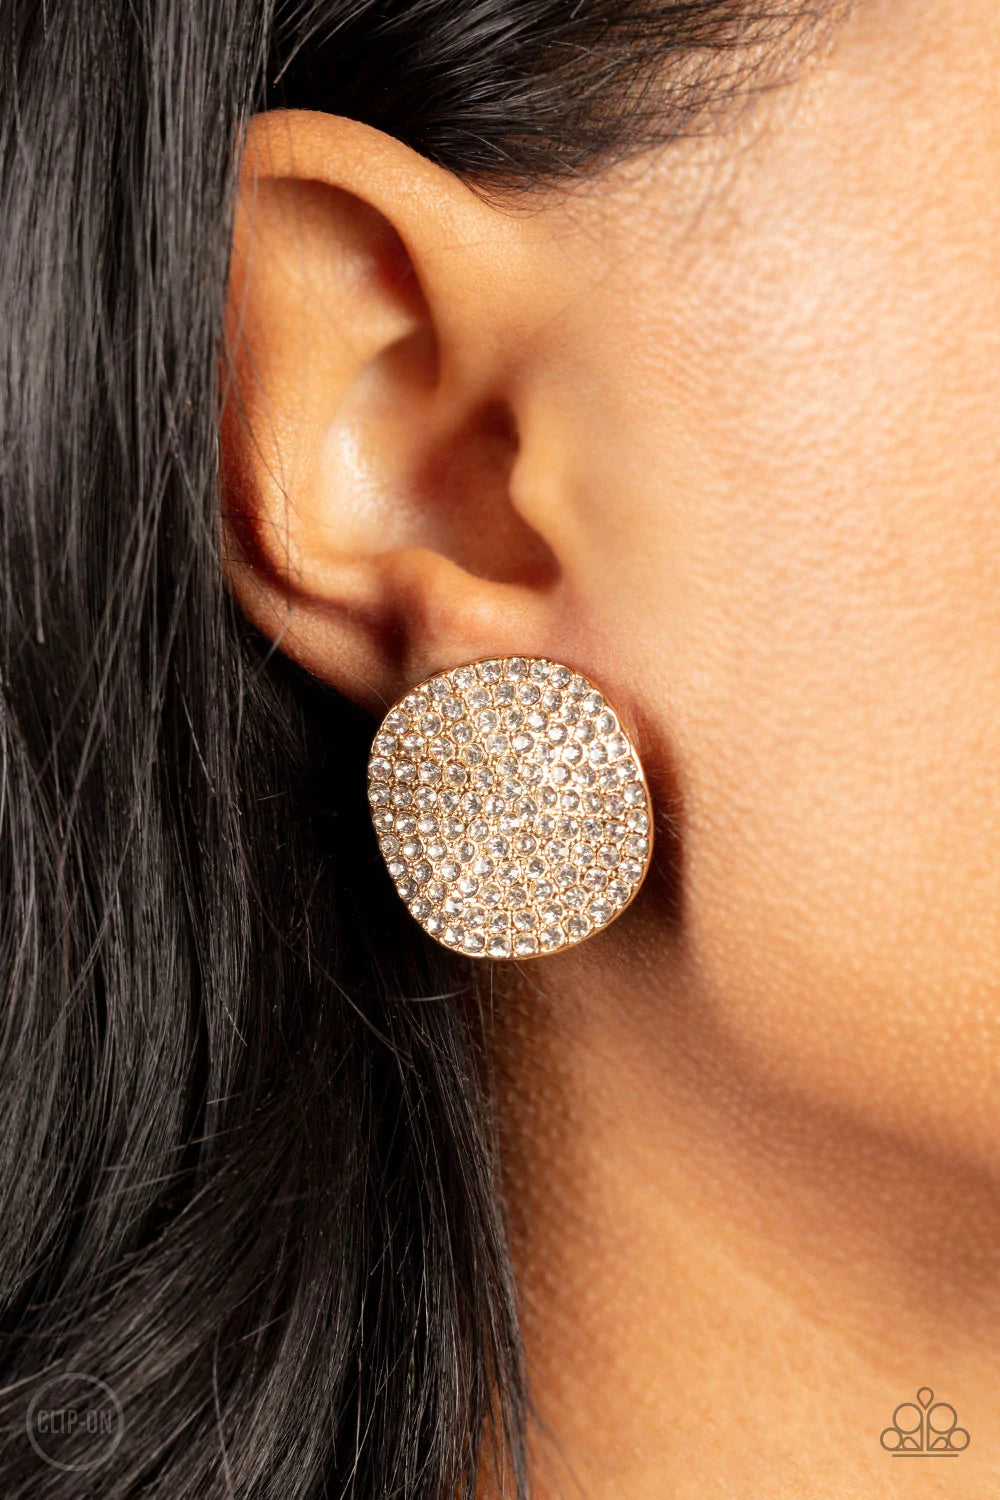 Paparazzi Accessories Lunch at the Louvre *Clip-on The front of a warped gold disc is encrusted in row after row of blinding white rhinestones, resulting in a refined display. Earring attaches to a standard clip-on fitting. Sold as one pair of clip-on ear